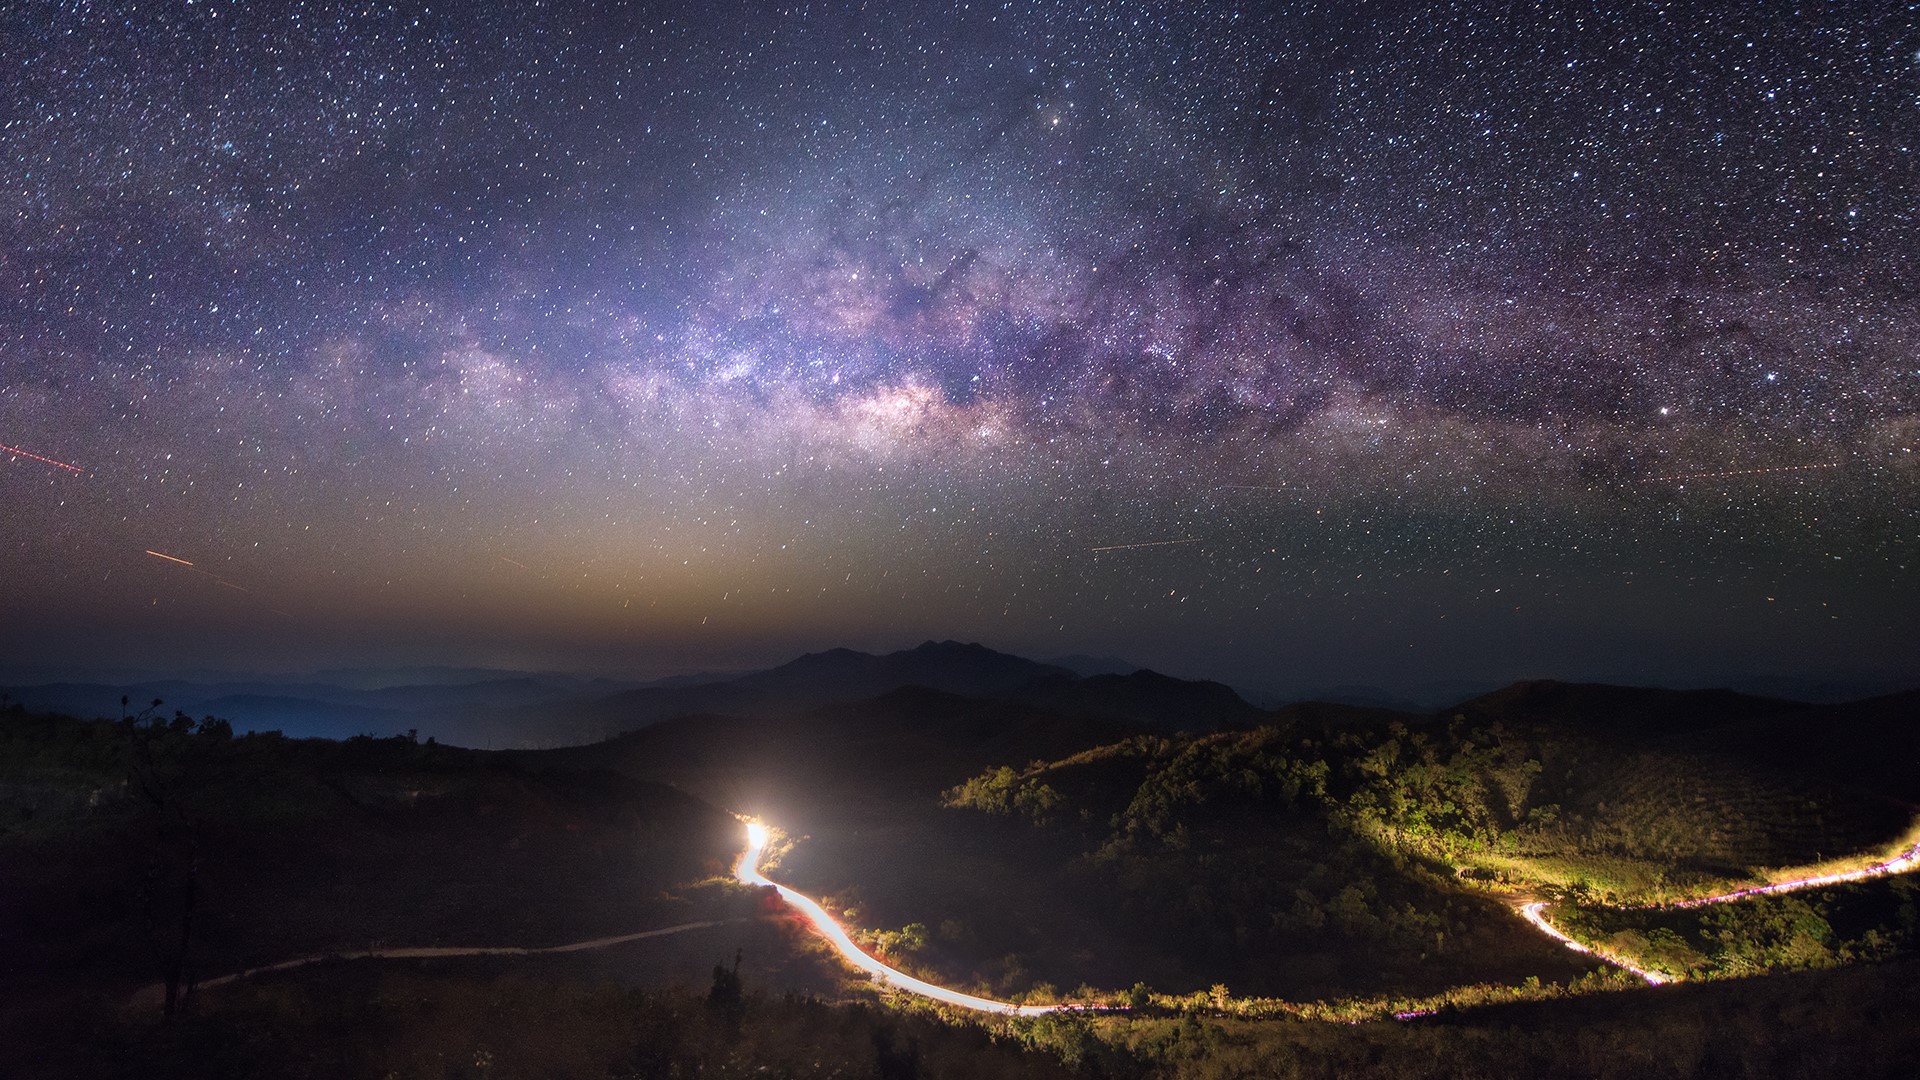 Nature Landscape Night Stars Galaxy Mountains Trees Road Long Exposure Shooting Stars Far View Milky 1920x1080